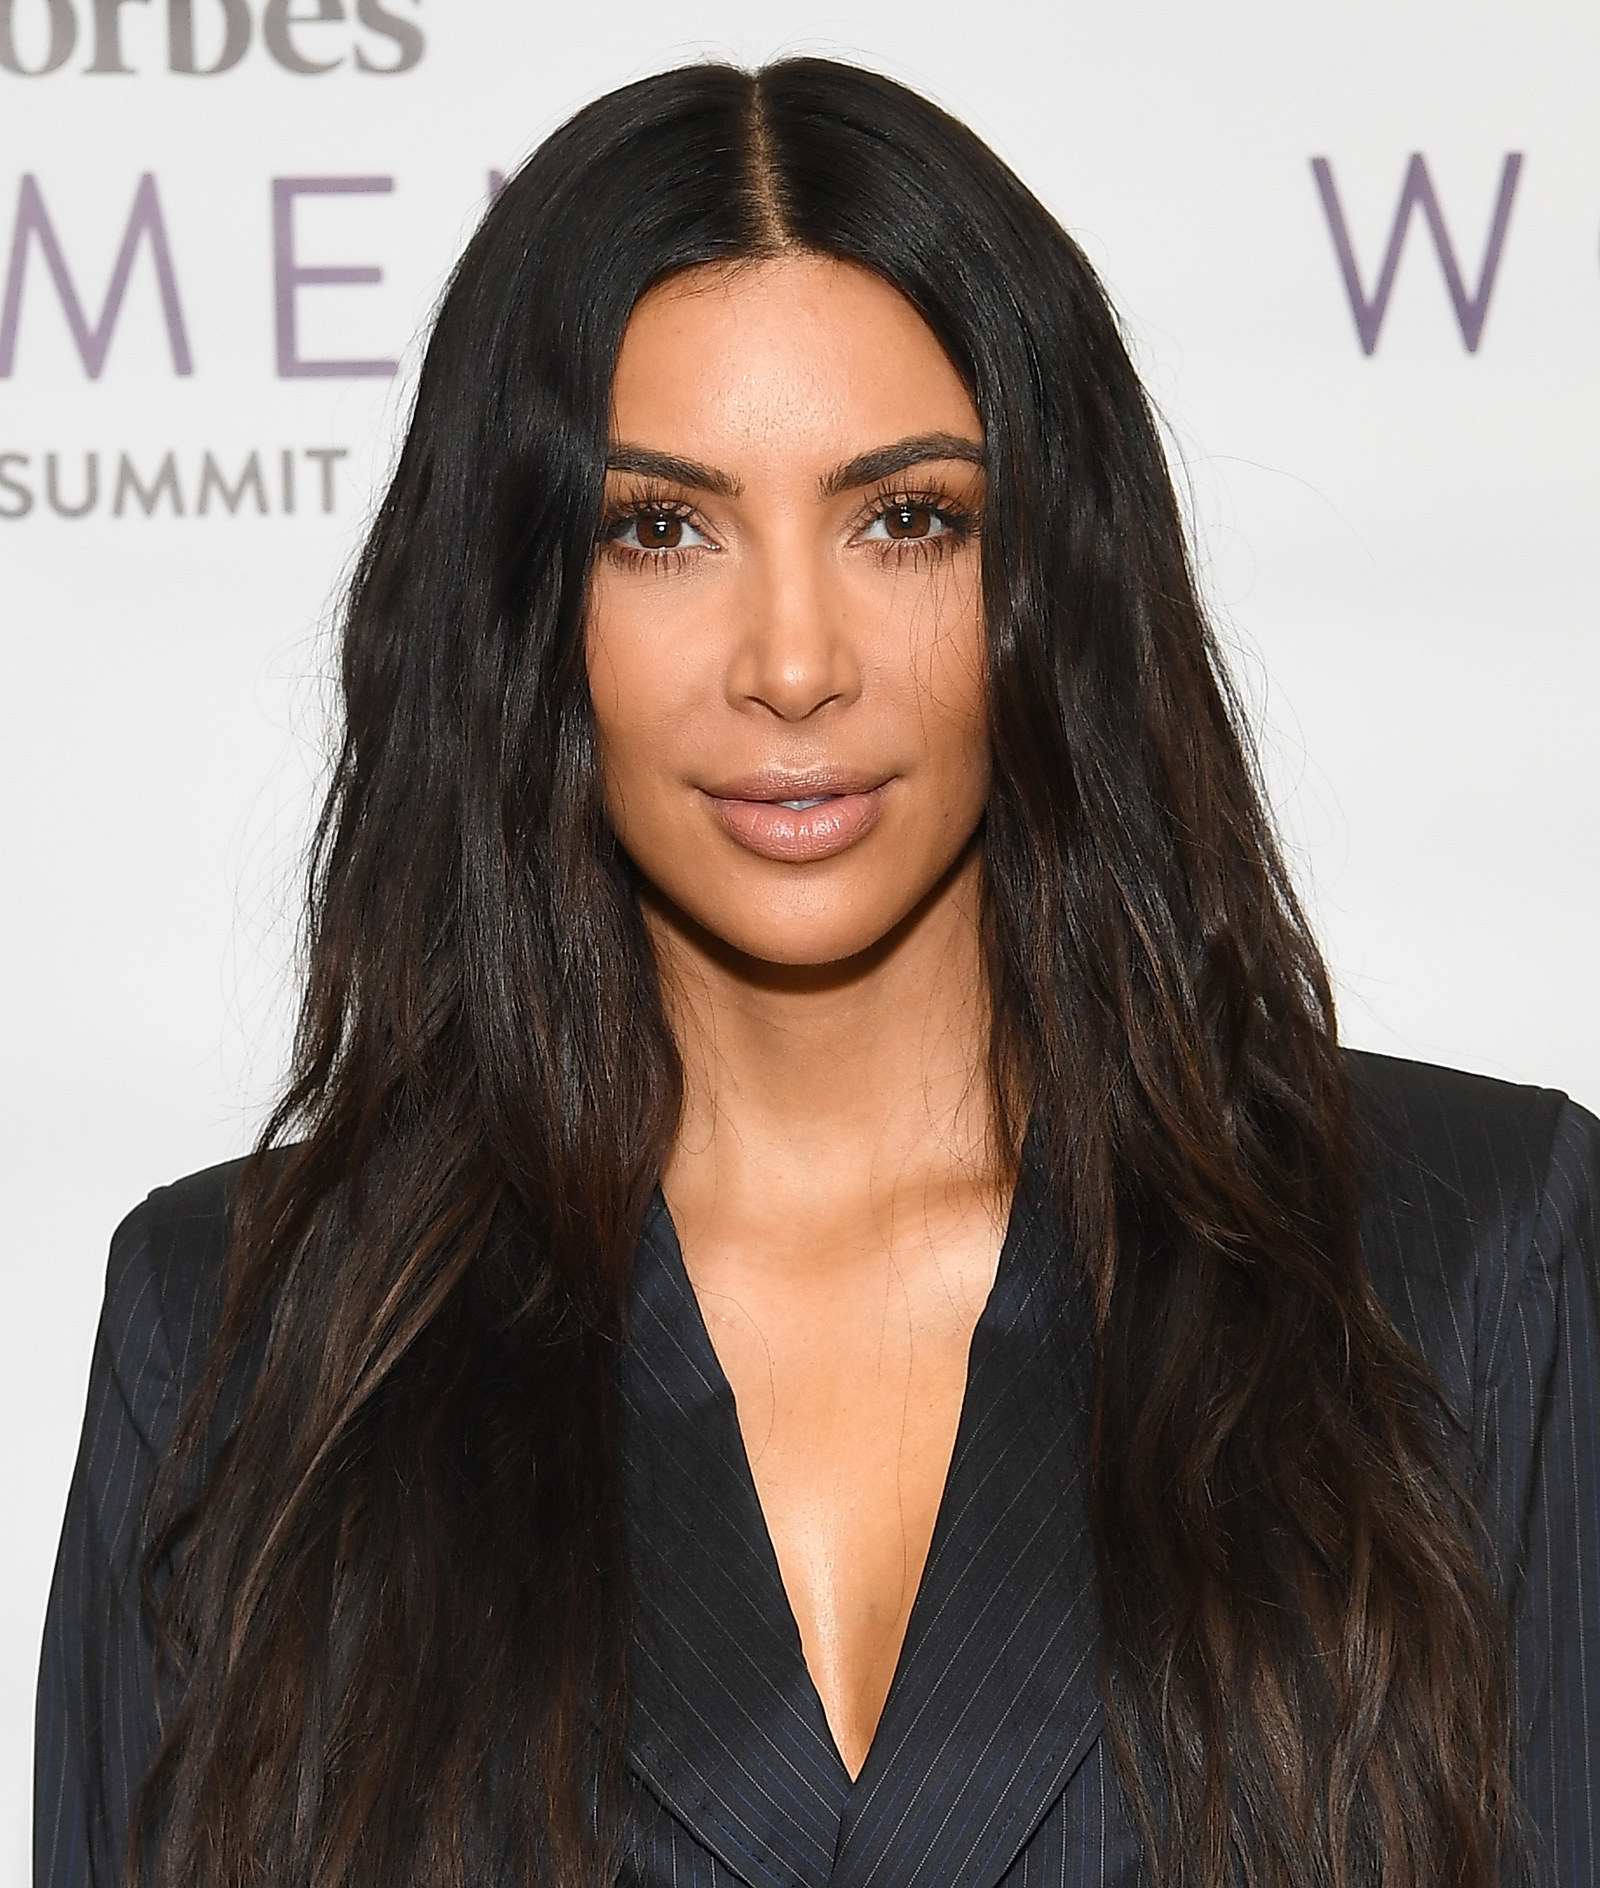 This Is The Hair Colour That Kim Kardashian, Khloe And Kylie Jenner All Want